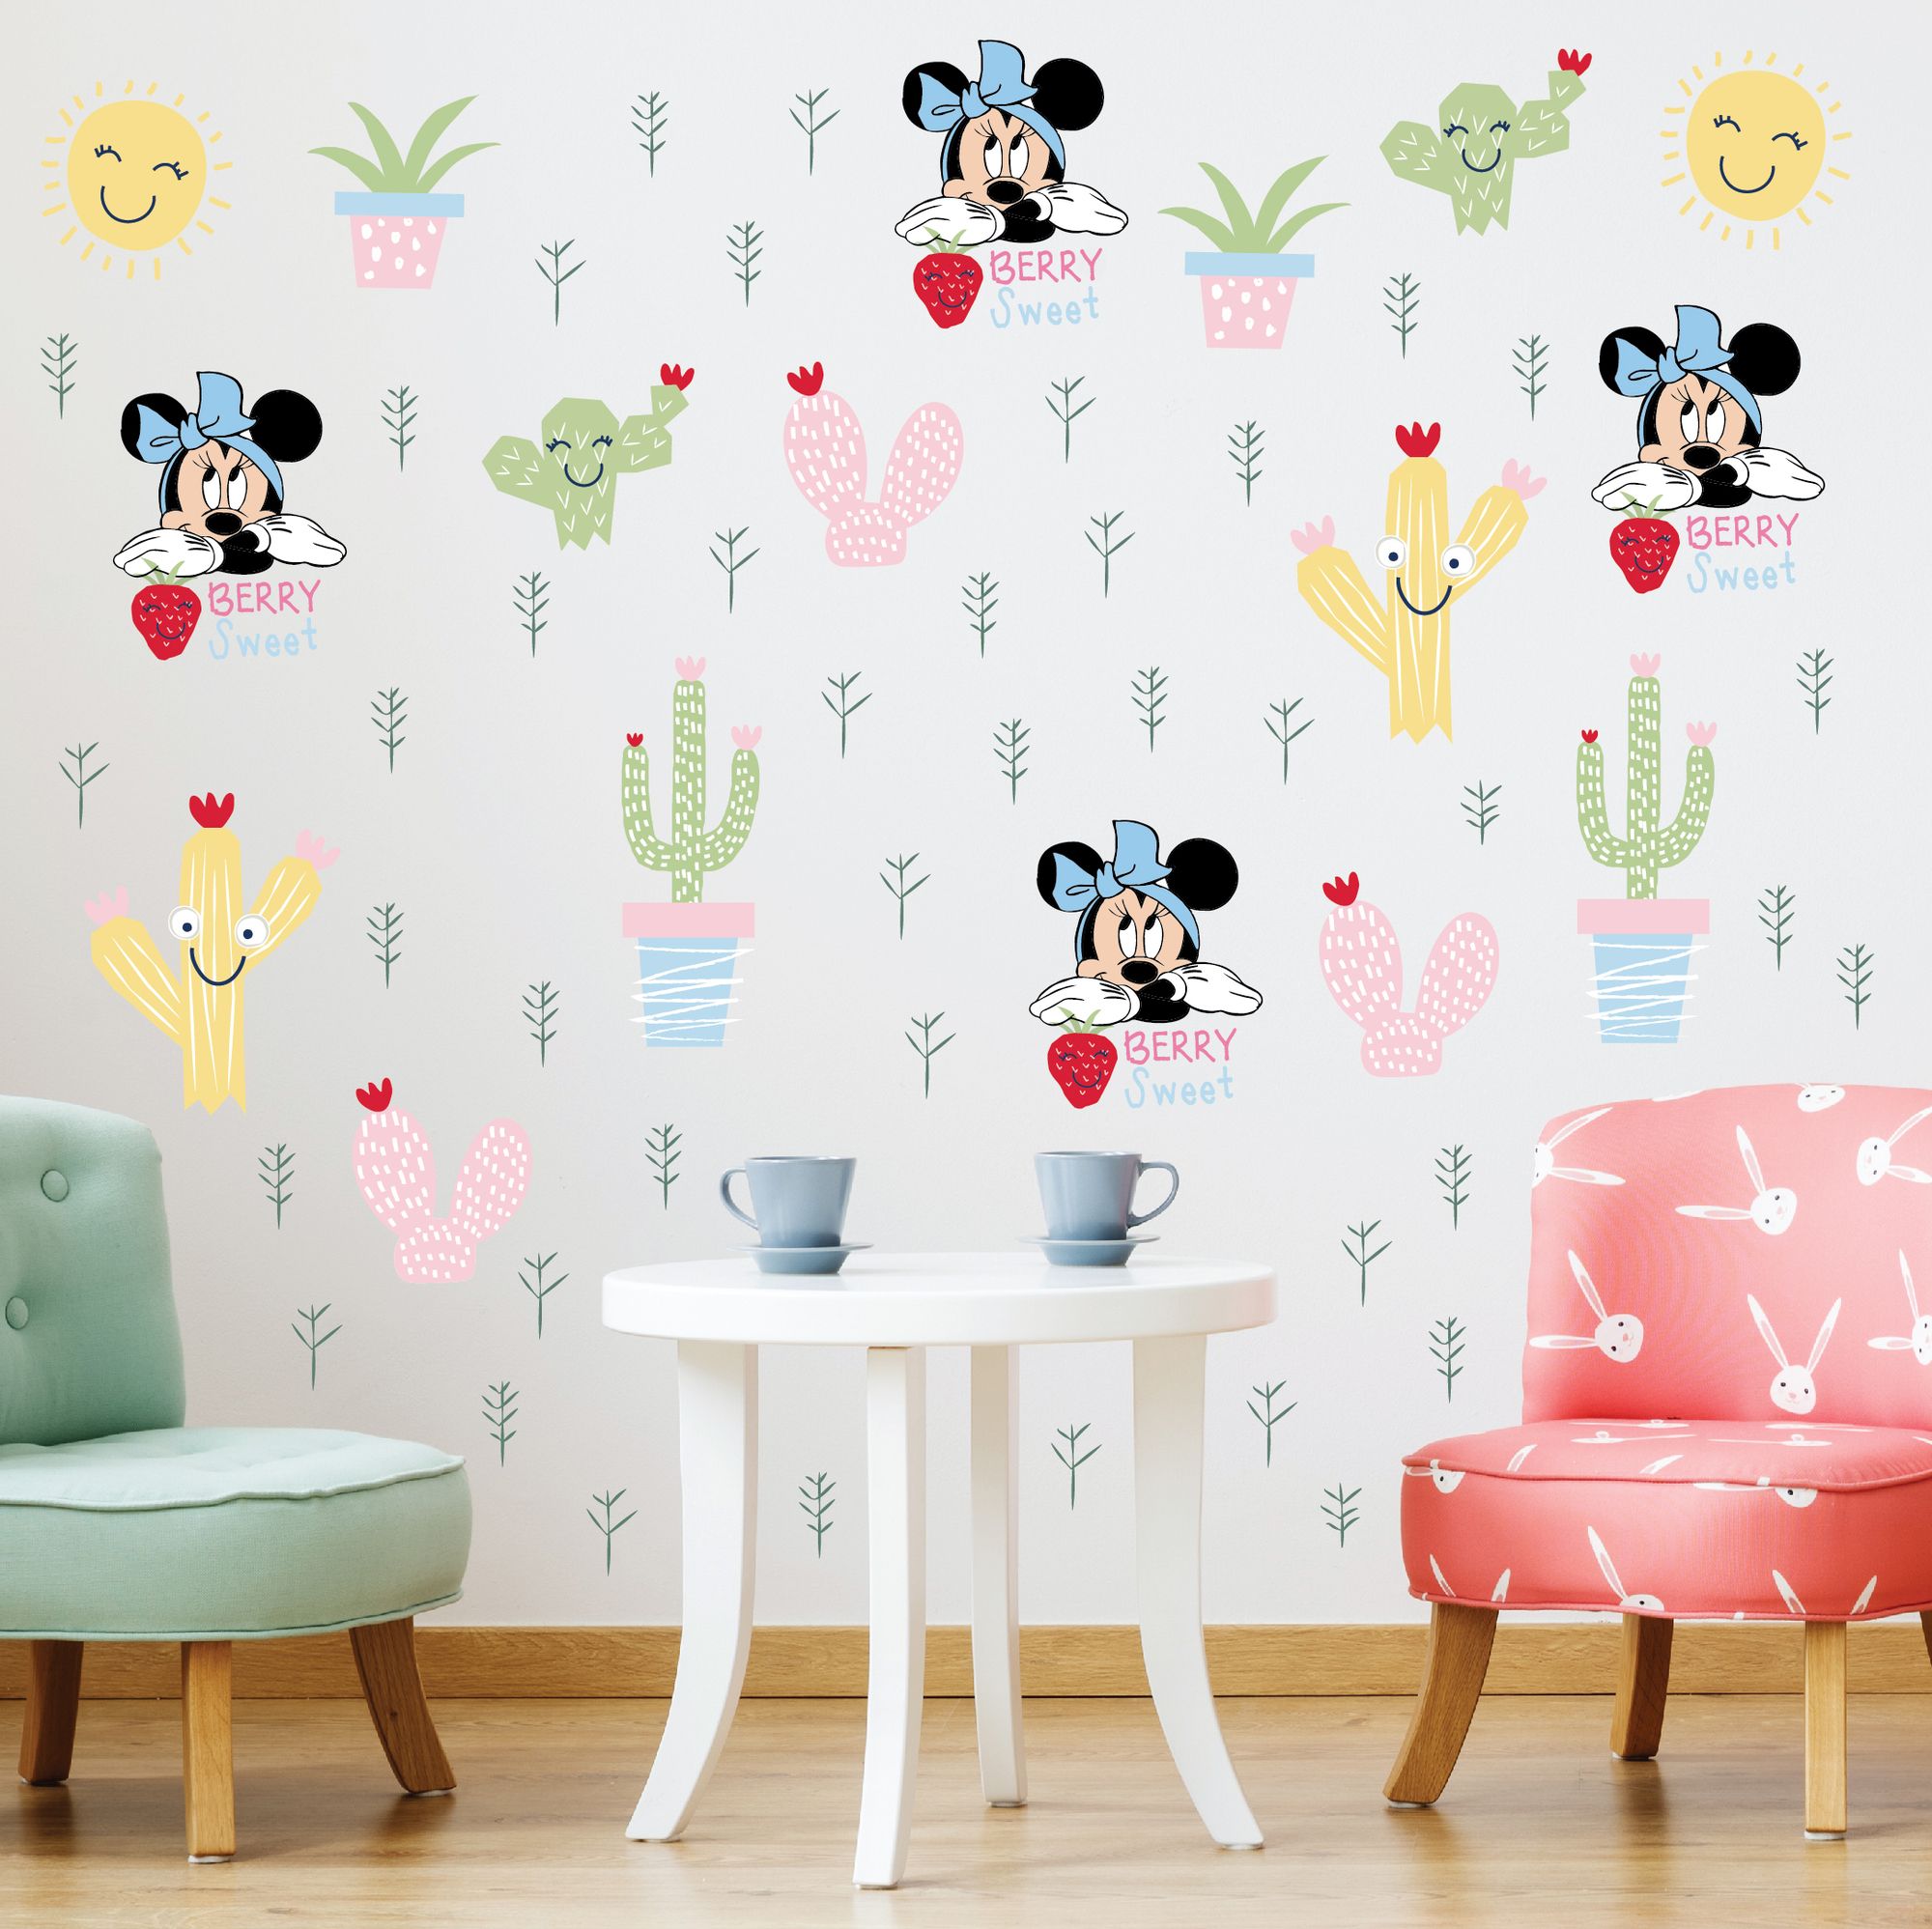 It's a Good Day - Wall Stickers & Decals by Asian Paints